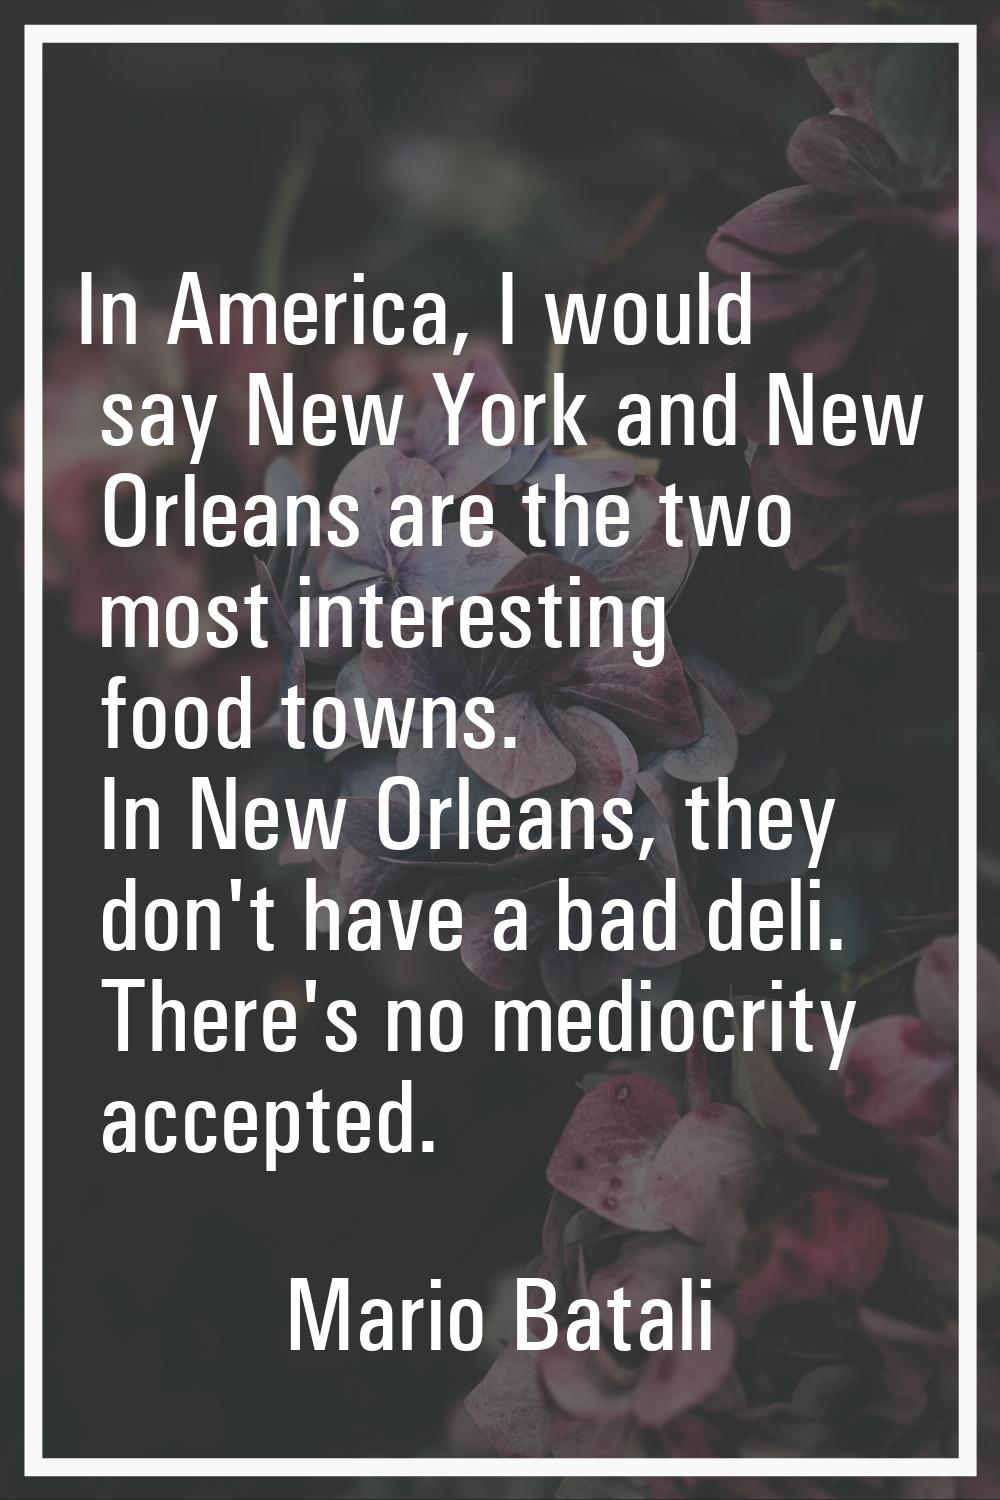 In America, I would say New York and New Orleans are the two most interesting food towns. In New Or